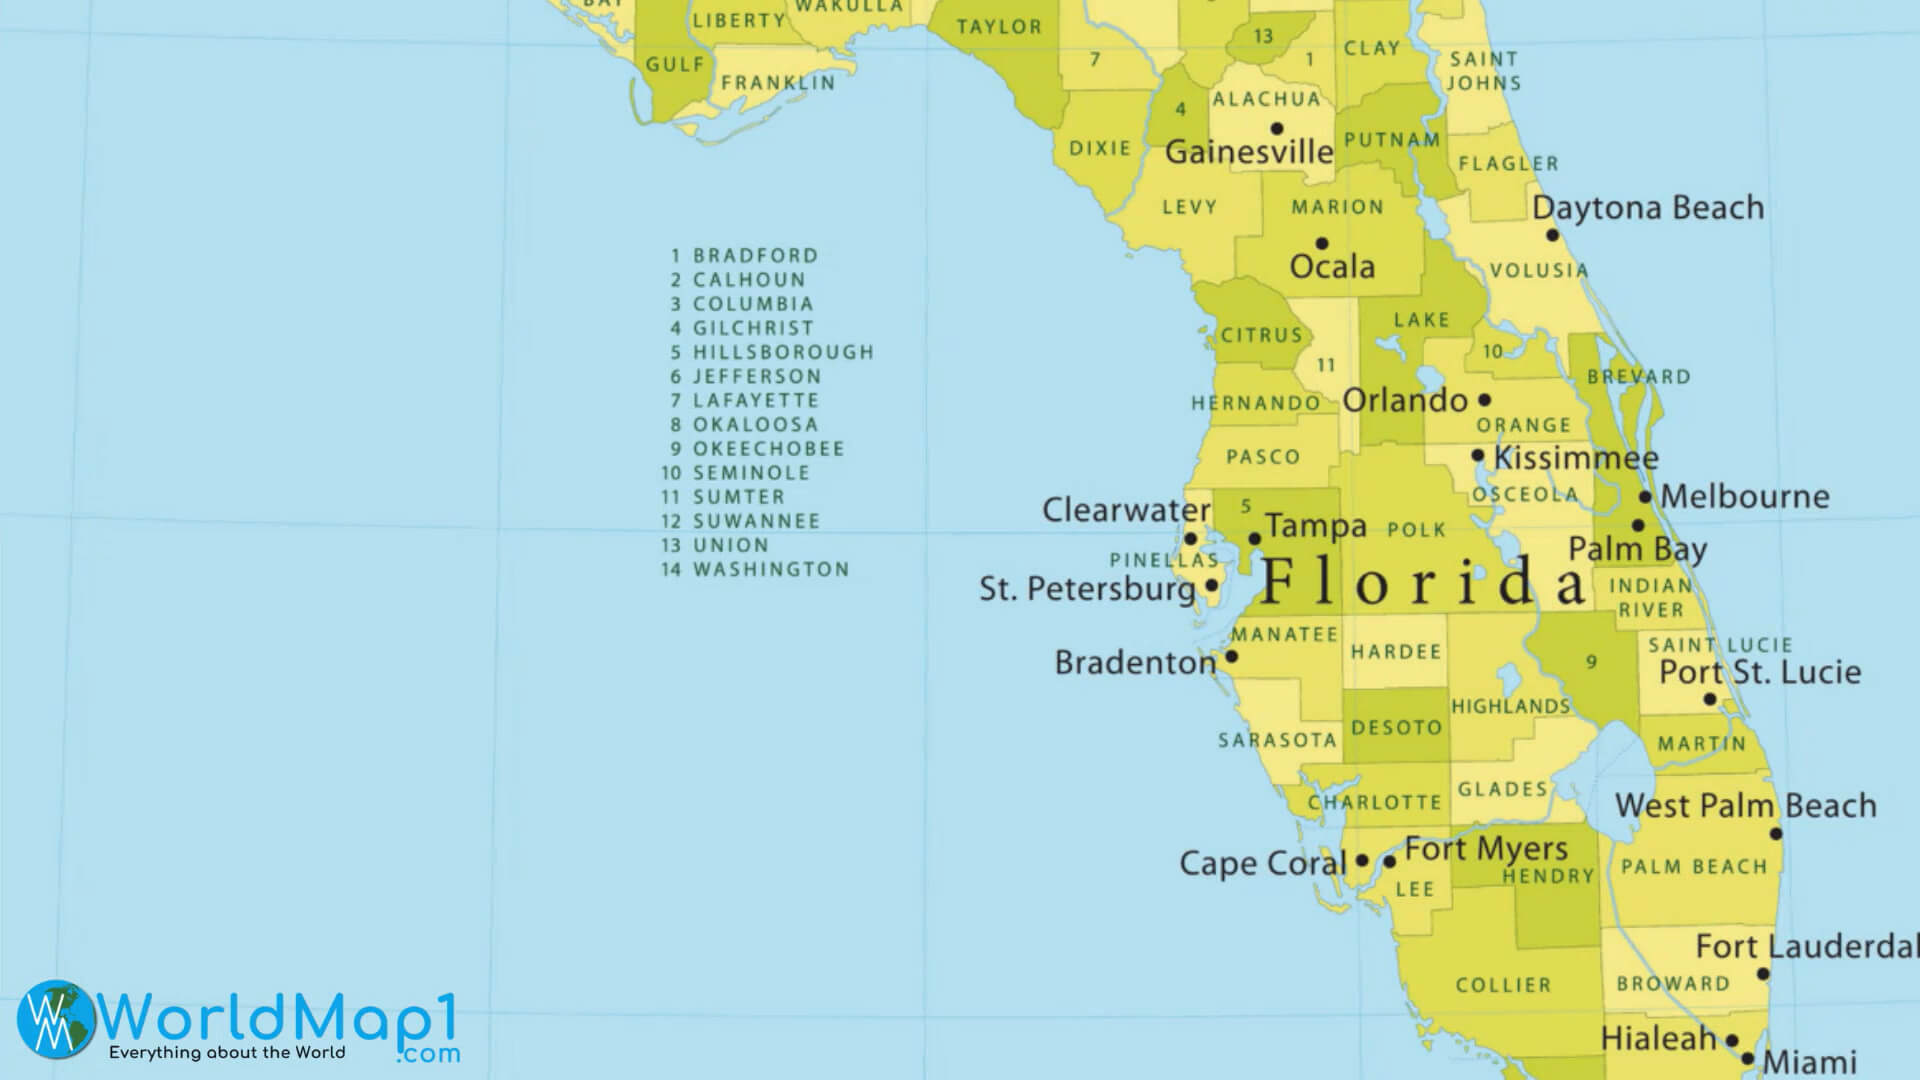 Major Cities Map of Florida with Lakes and Rivers